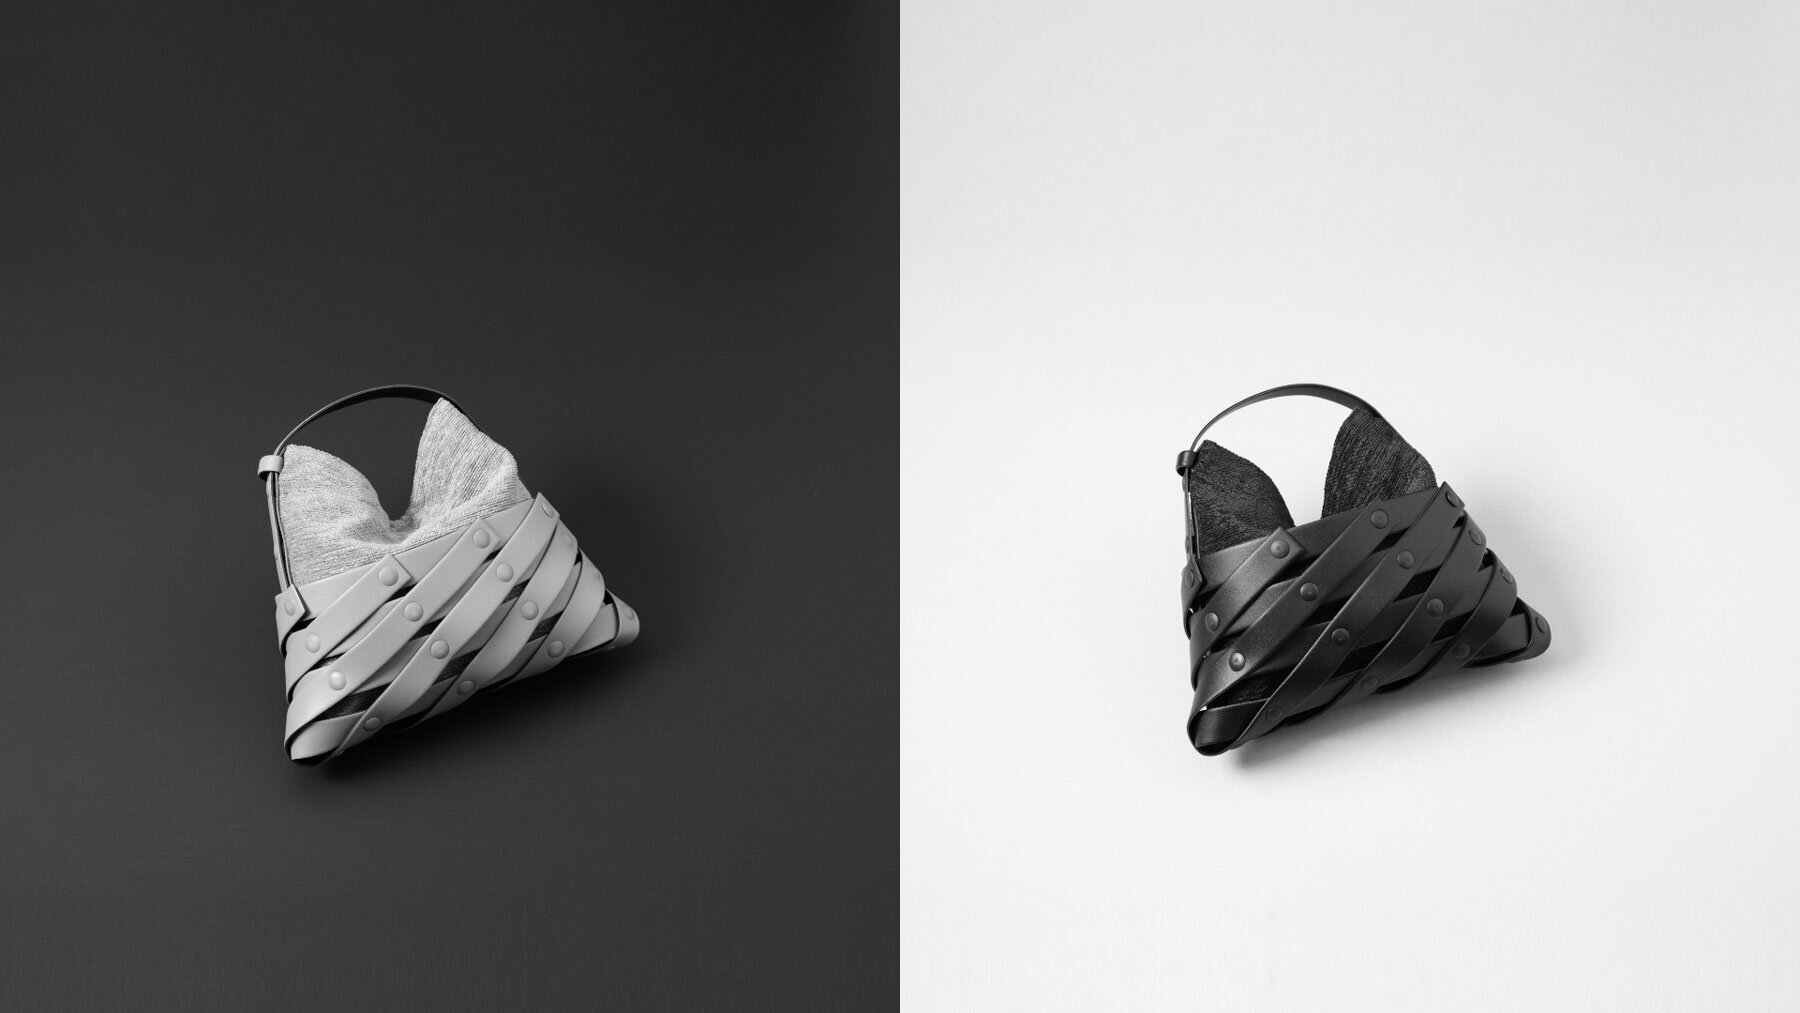 ISSEY MIYAKE's 'spiral grid' bags unfolds into mesh-like design